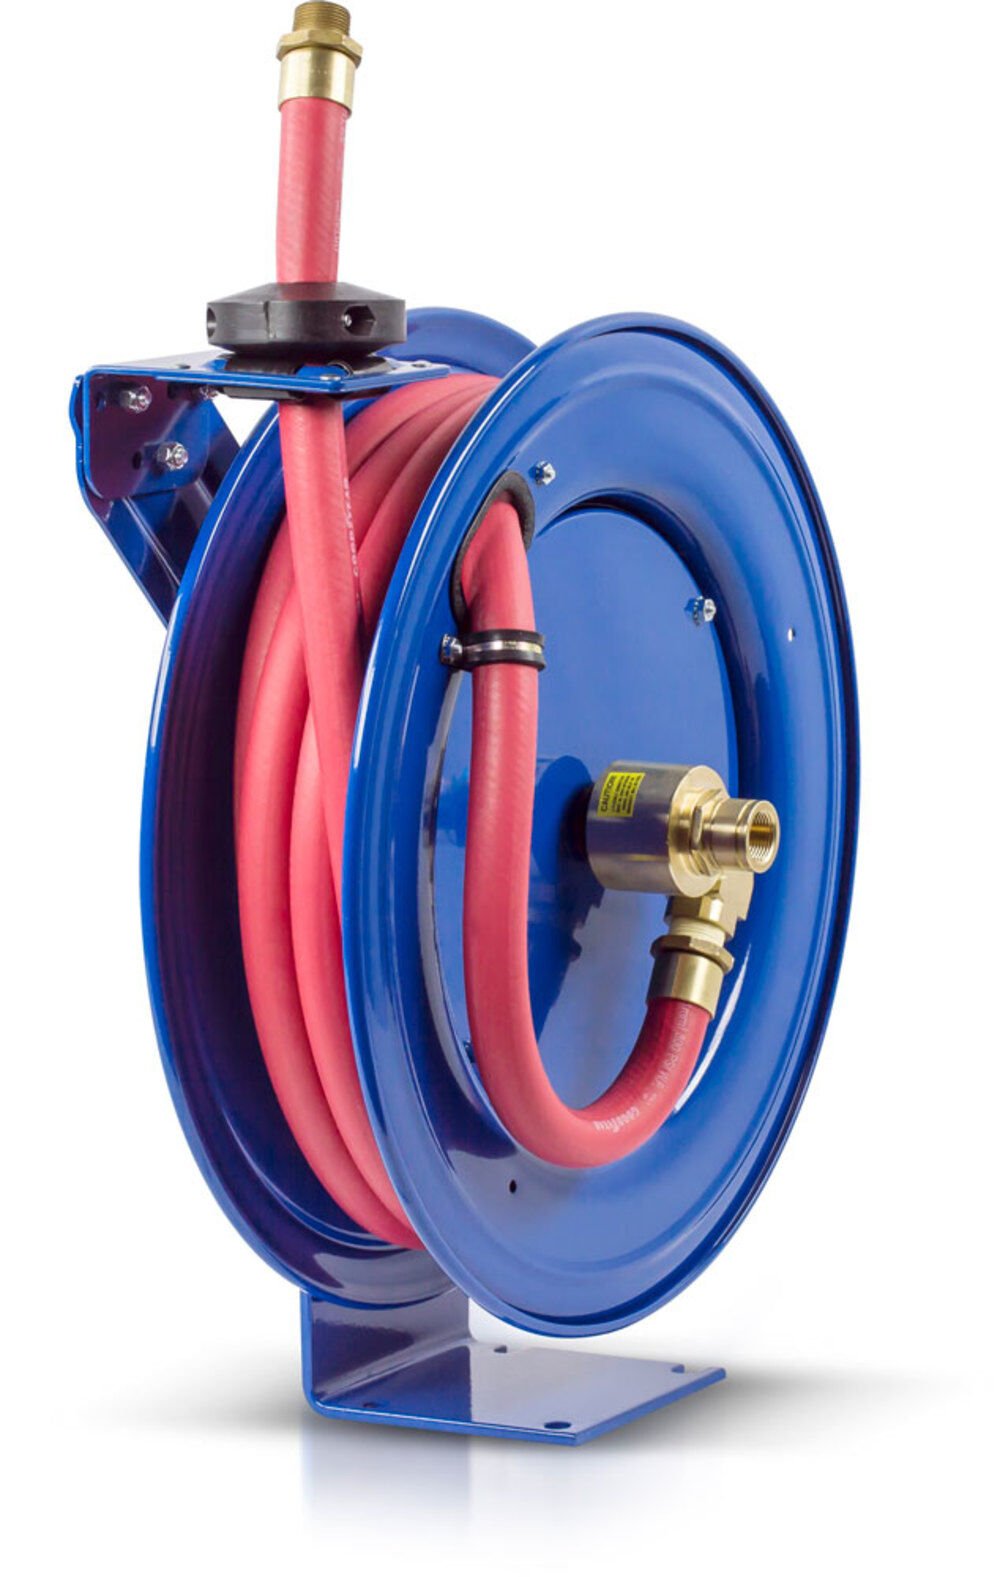 Coxreels 3/4 in x 25 ft Heavy Duty Spring Driven Fuel Hose Reel 300 PSI  SHF-N-525 - Acme Tools